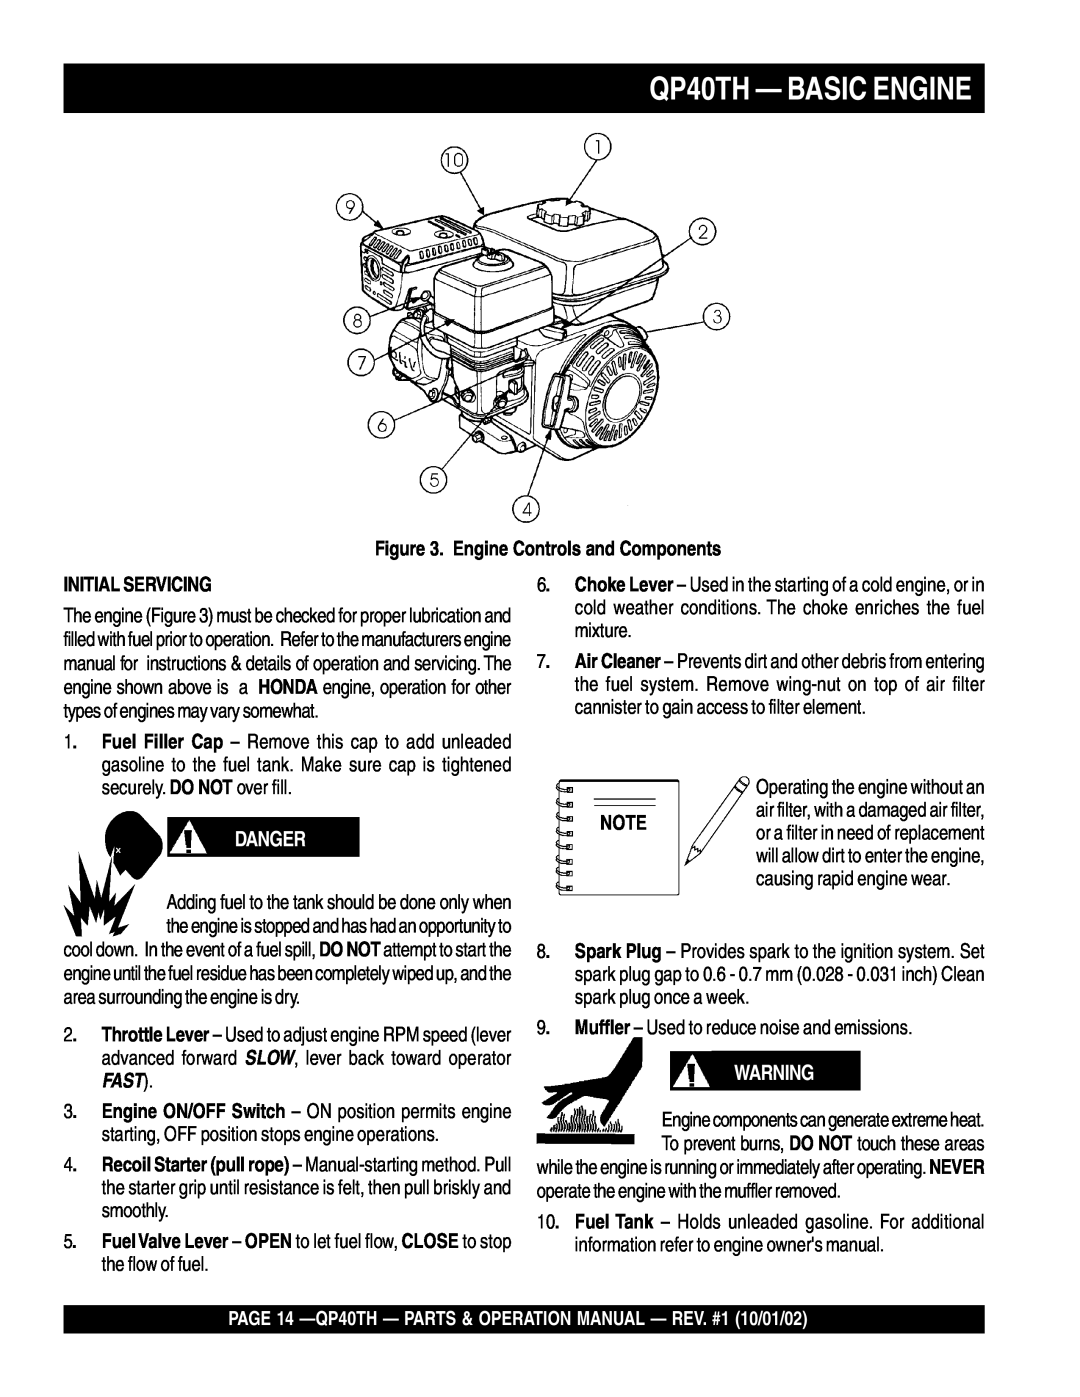 Multiquip operation manual QP40TH - BASIC ENGINE, Danger, Engine Controls and Components 